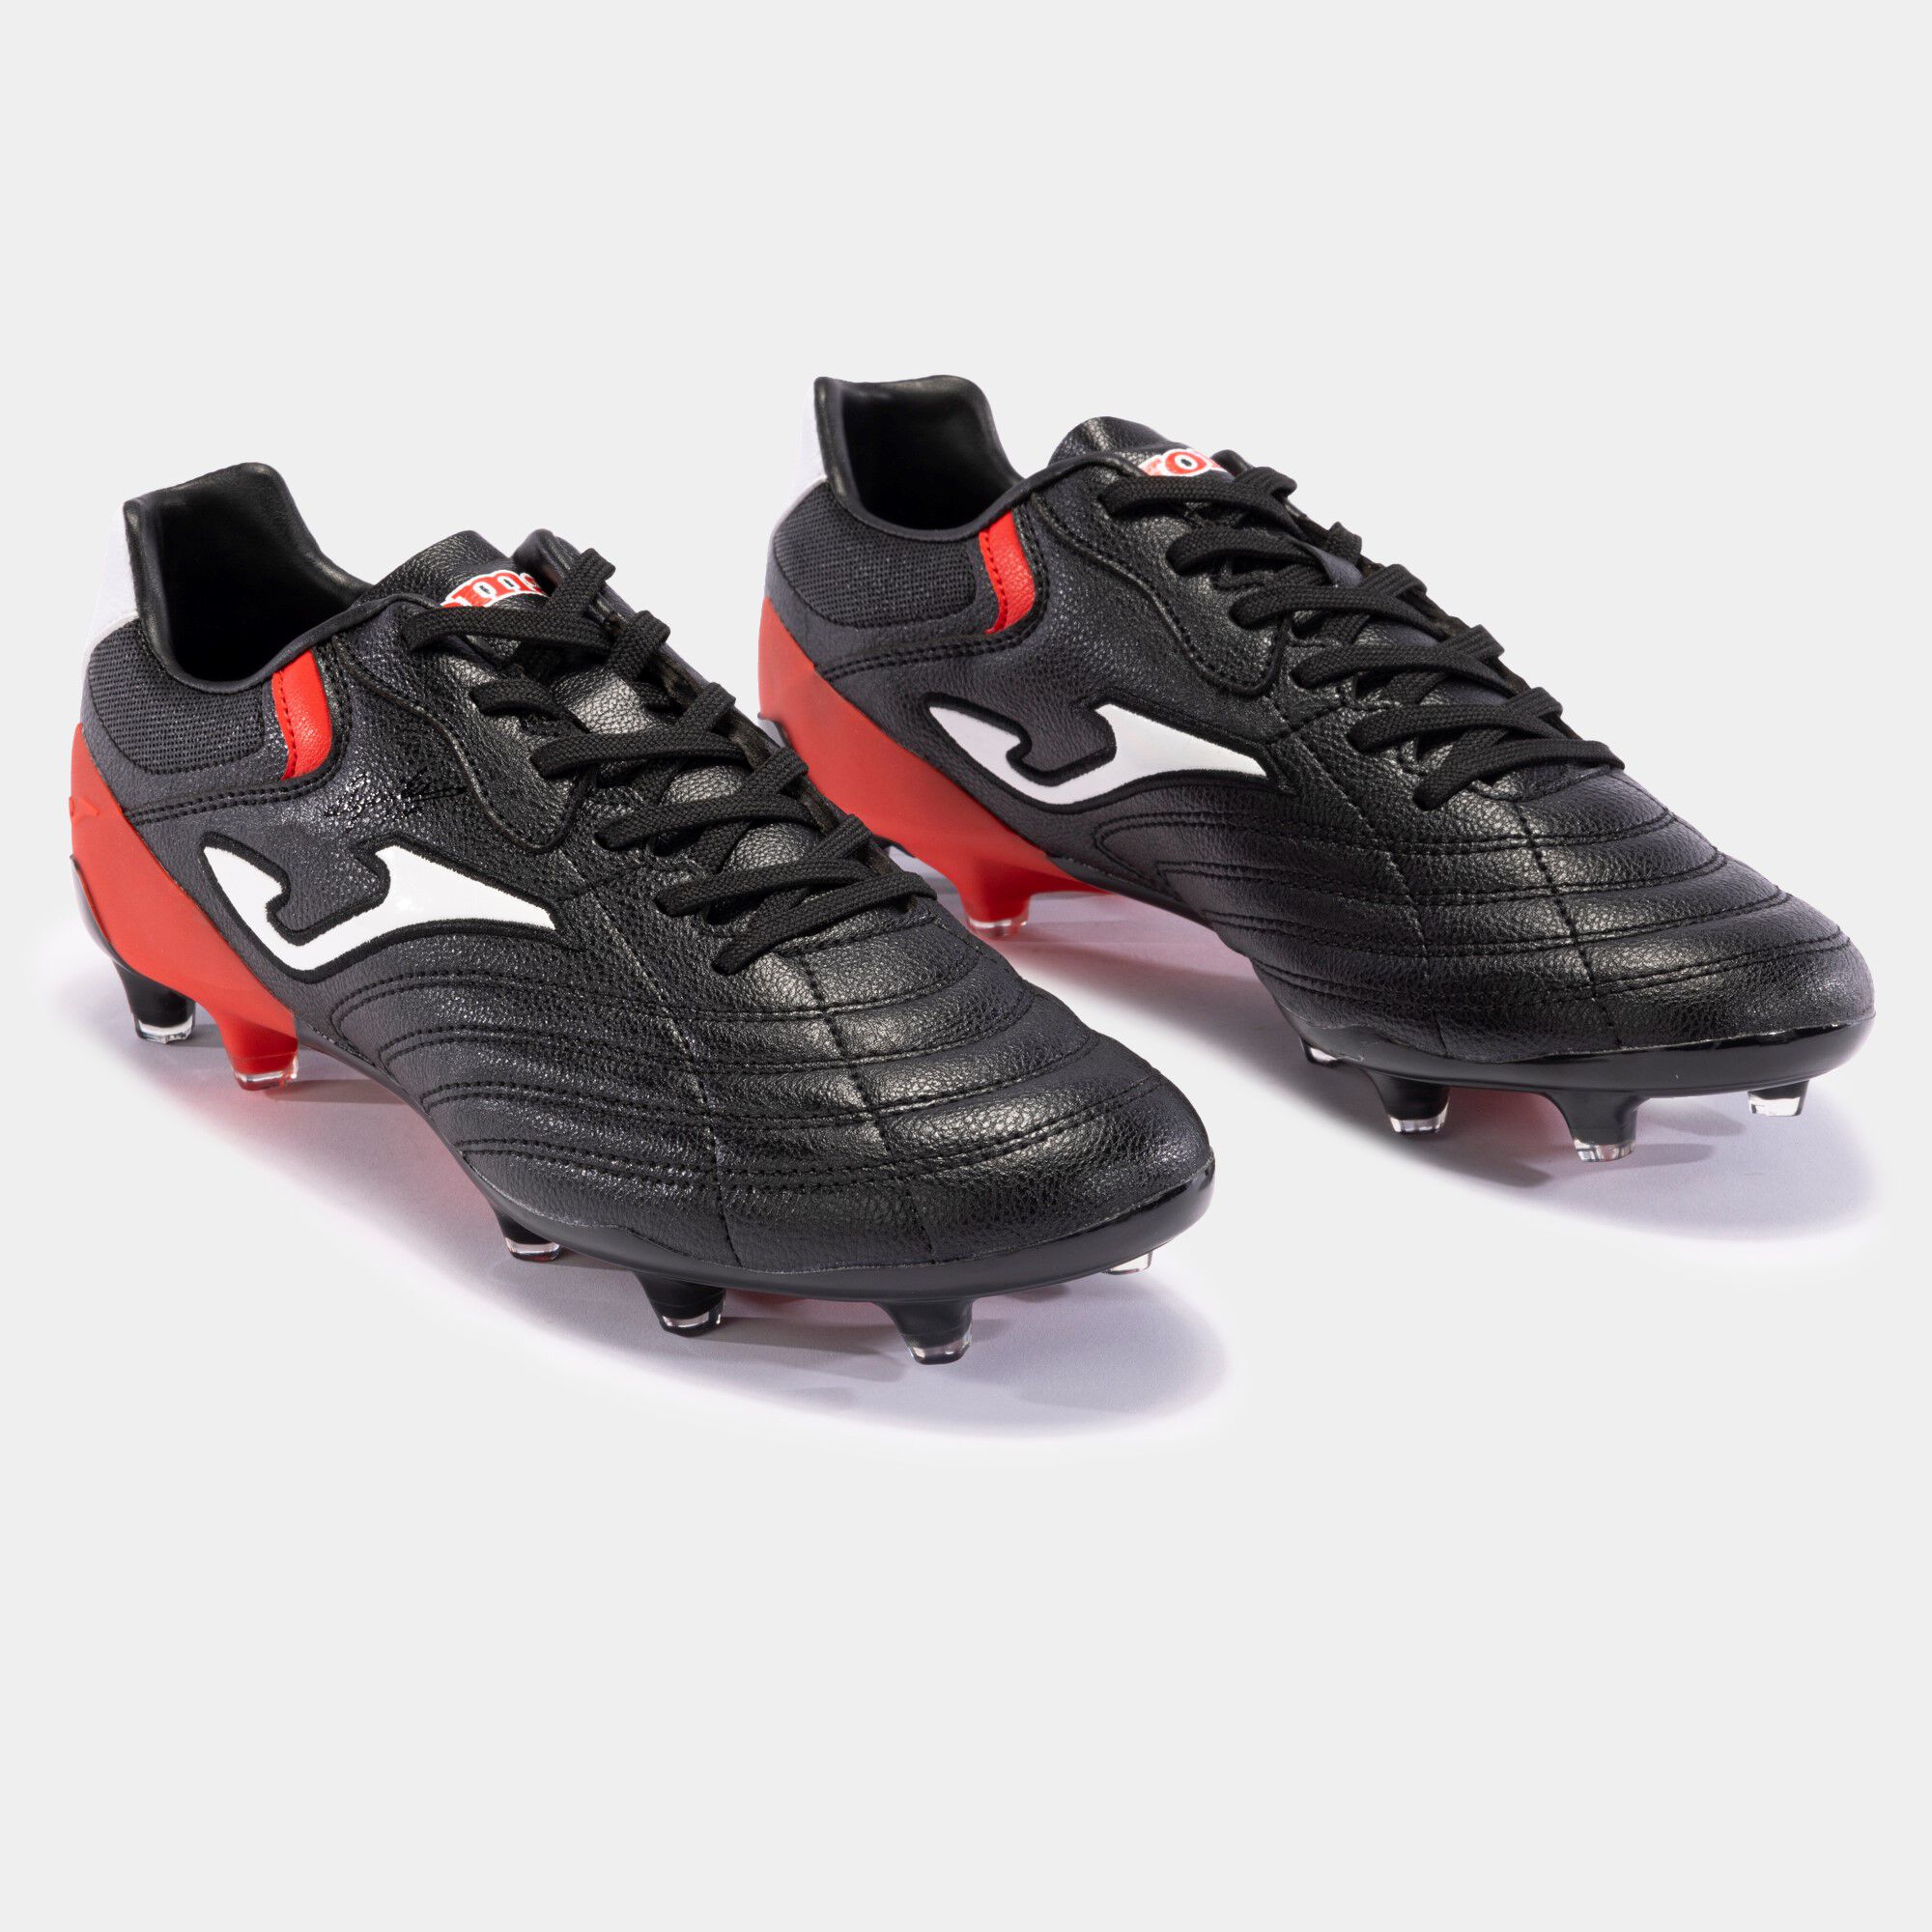 Football boots Aguila Cup 23 firm ground FG black red